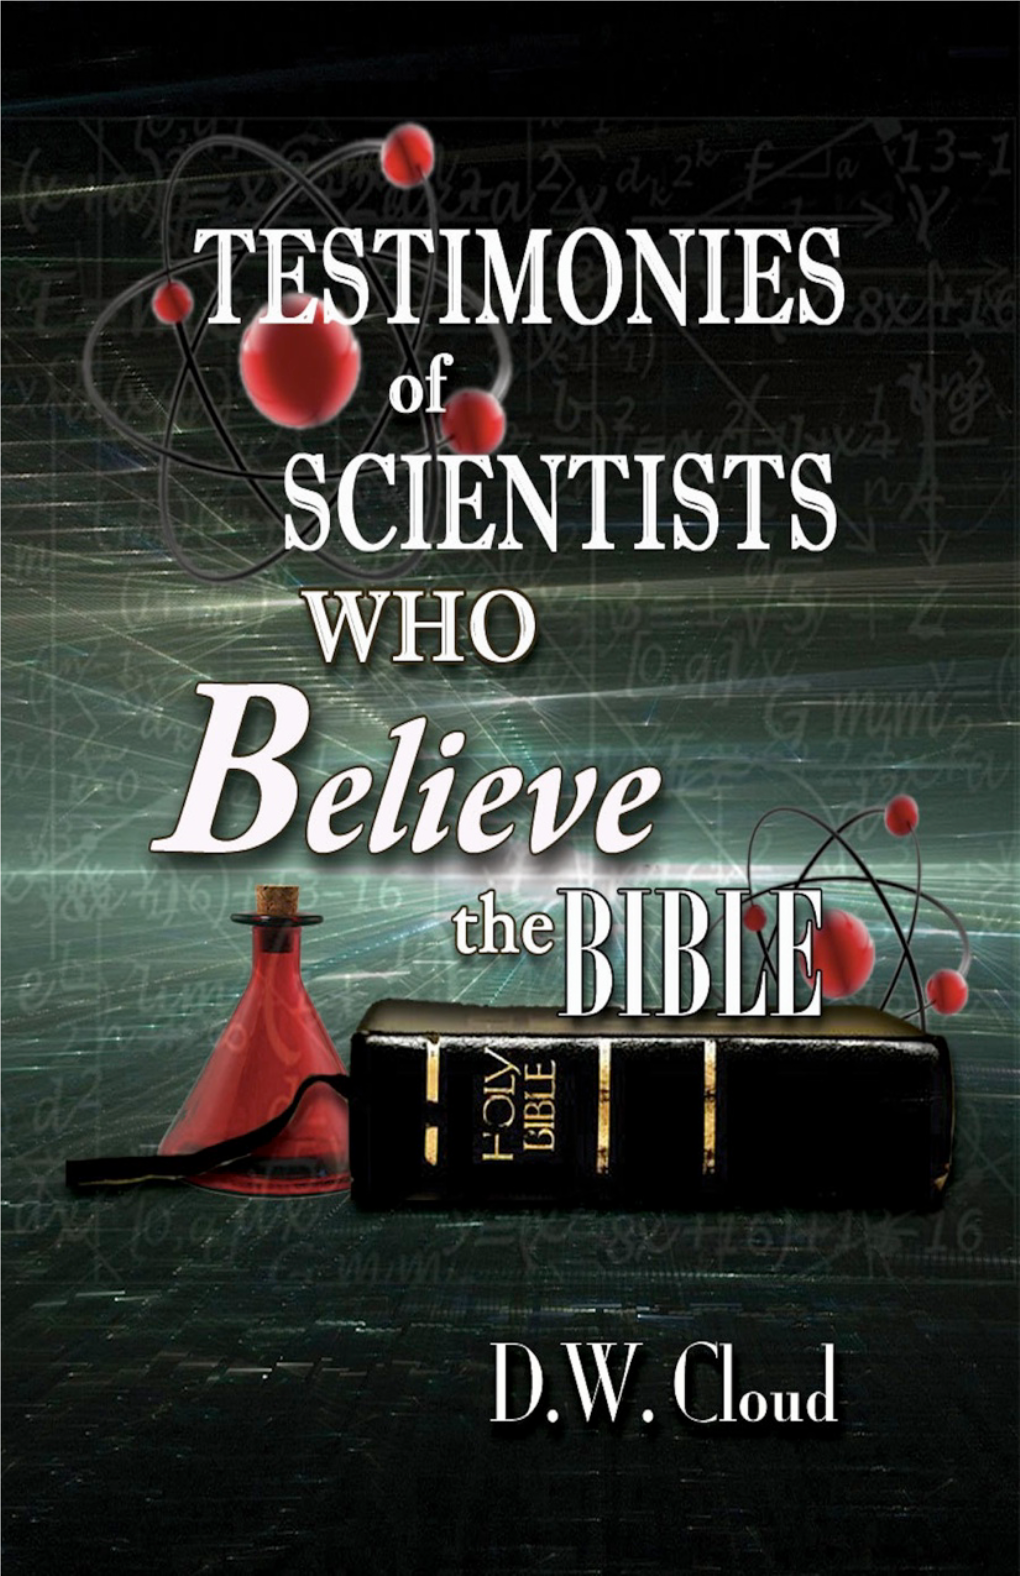 Testimonies of Scientists Who Believe the Bible Copyright 2011 by D.W